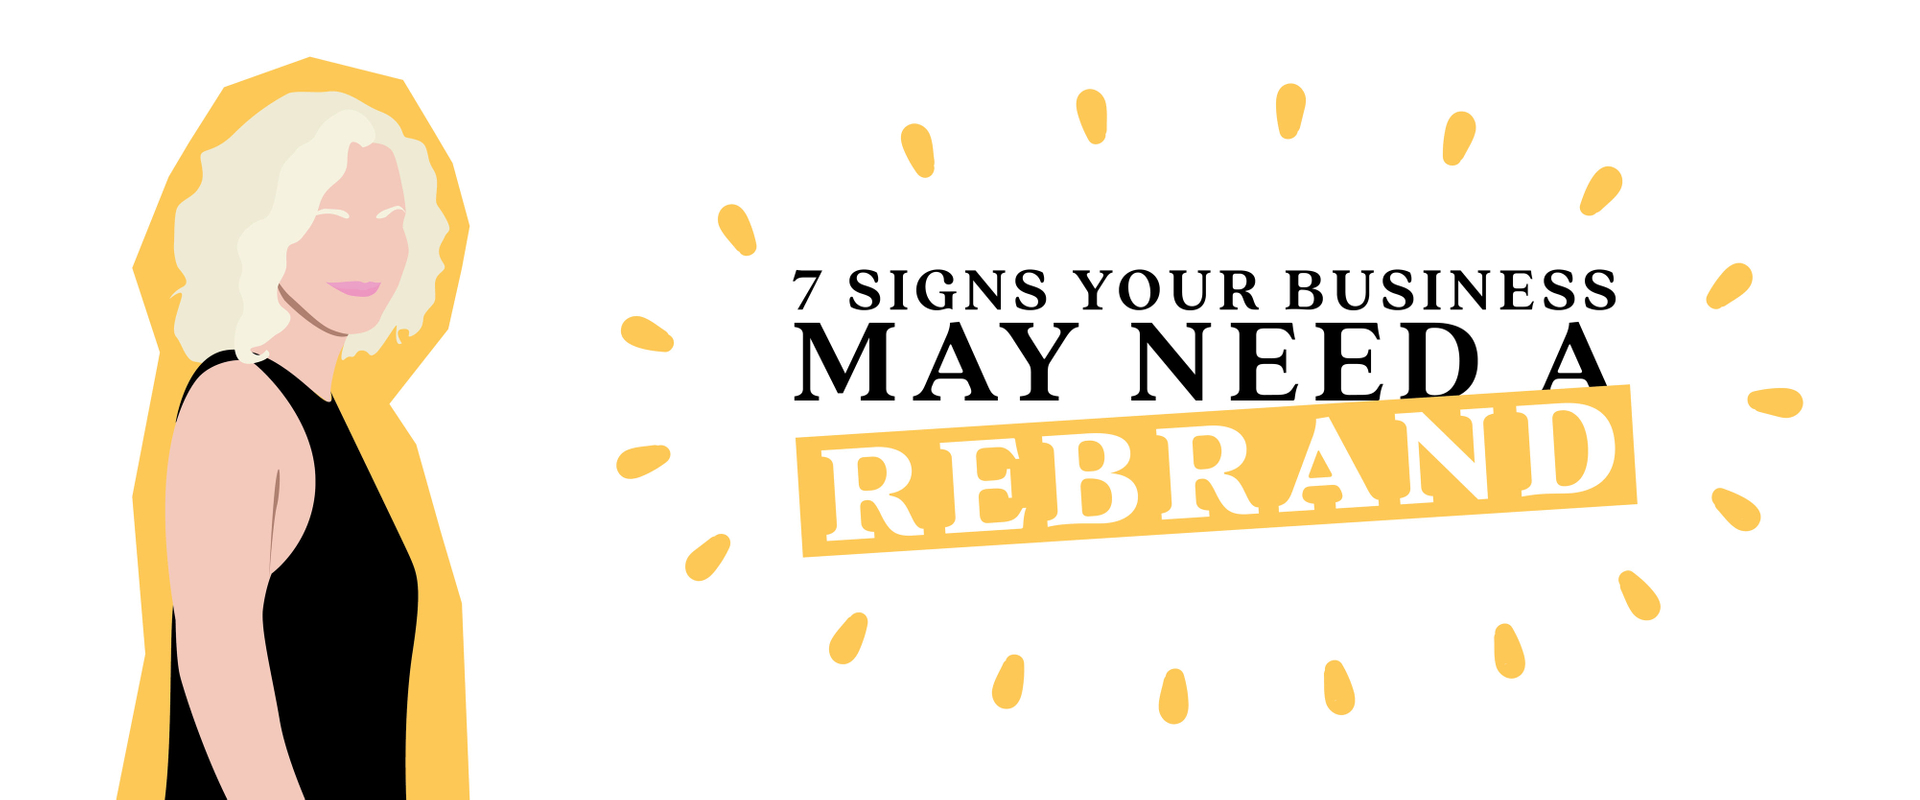 7 Signs Your Business May Need a Rebrand